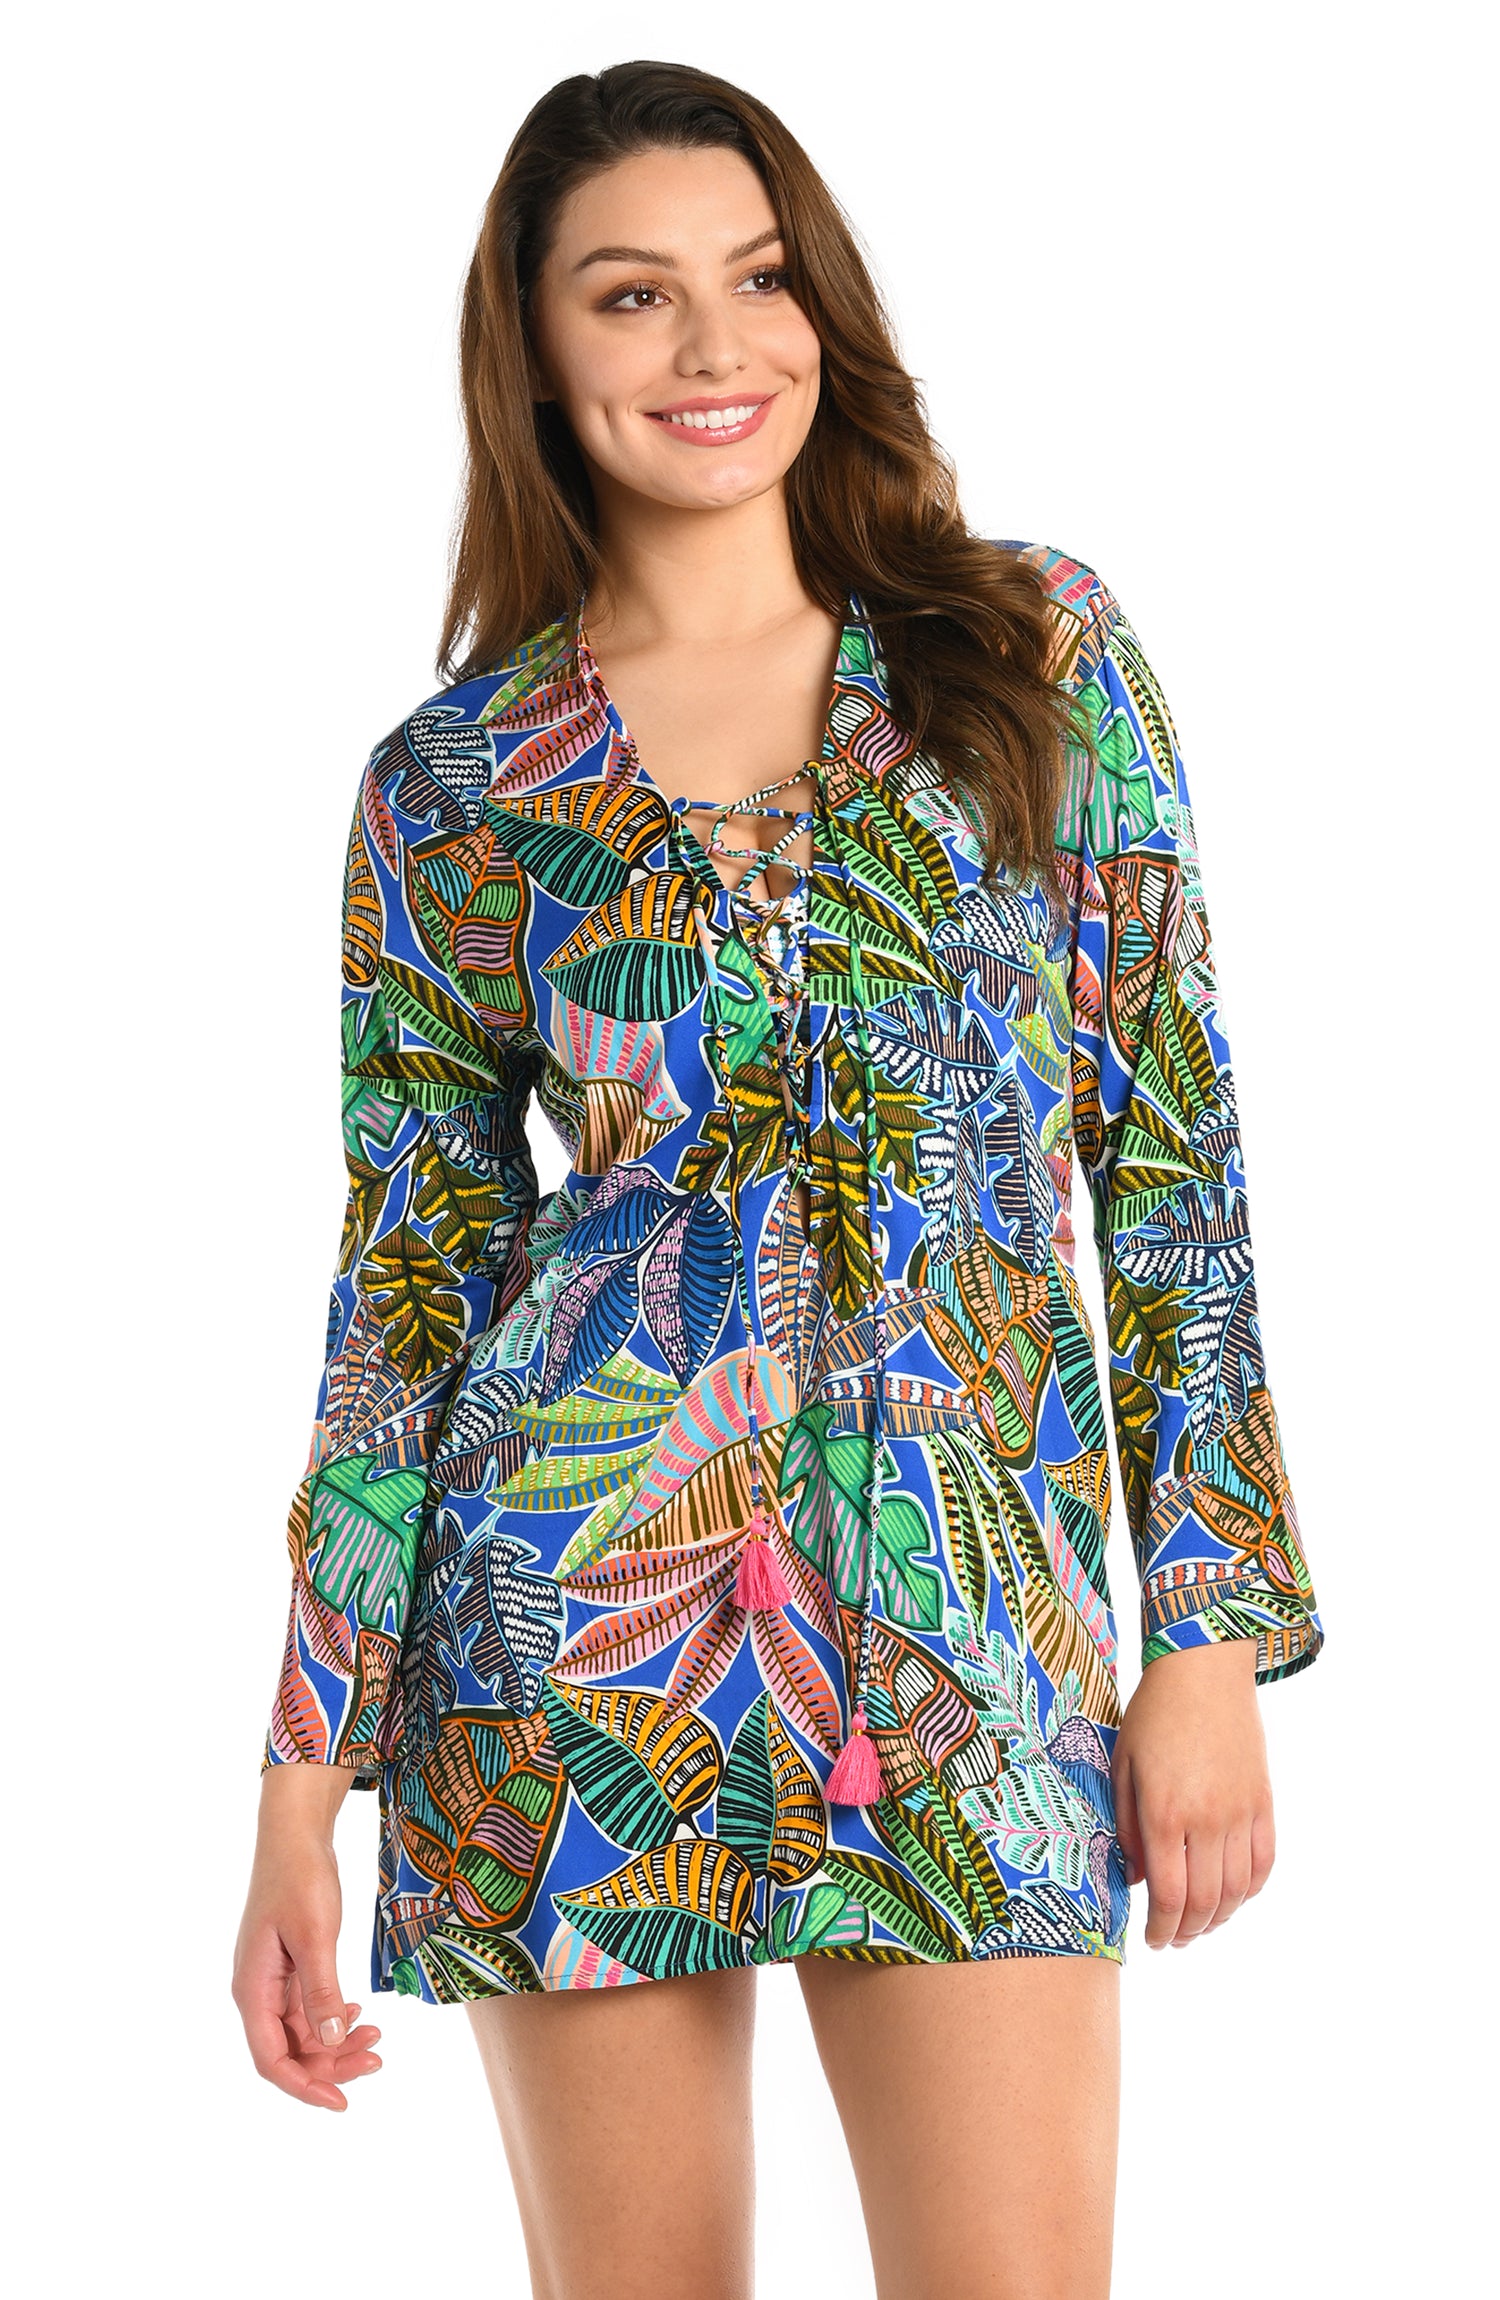 Model is wearing a neon colored printed tunic cover up from our Neon Nights collection!